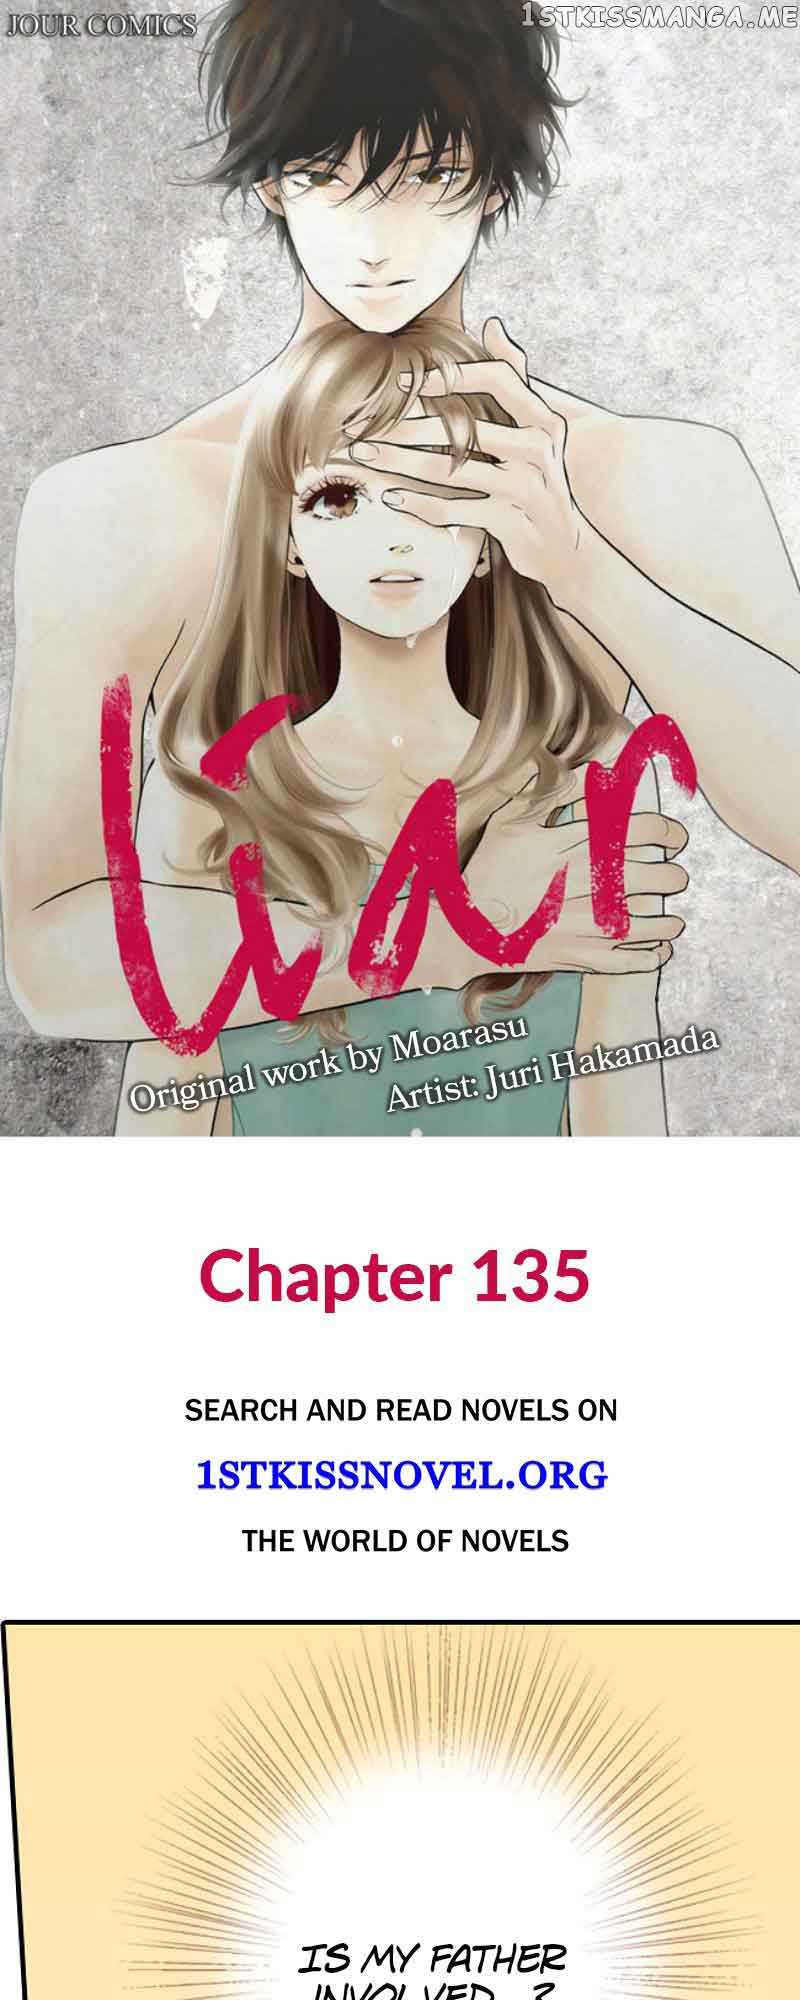 Liar chapter 135